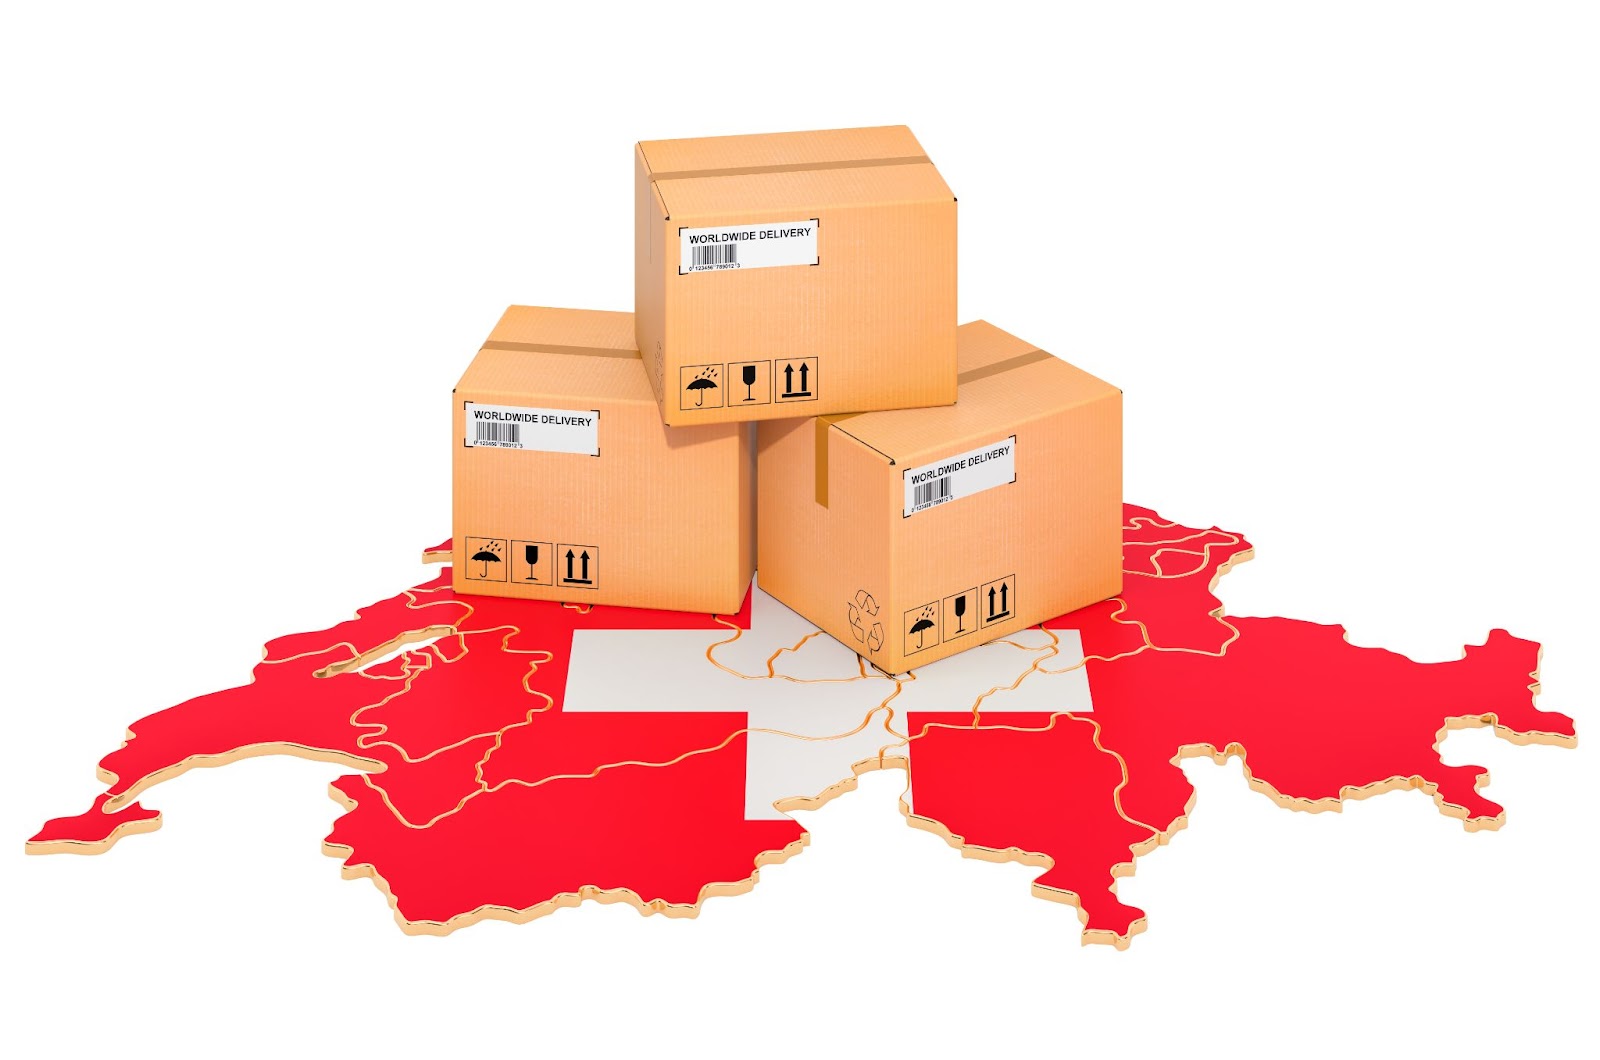 Map of Switzerland with parcels